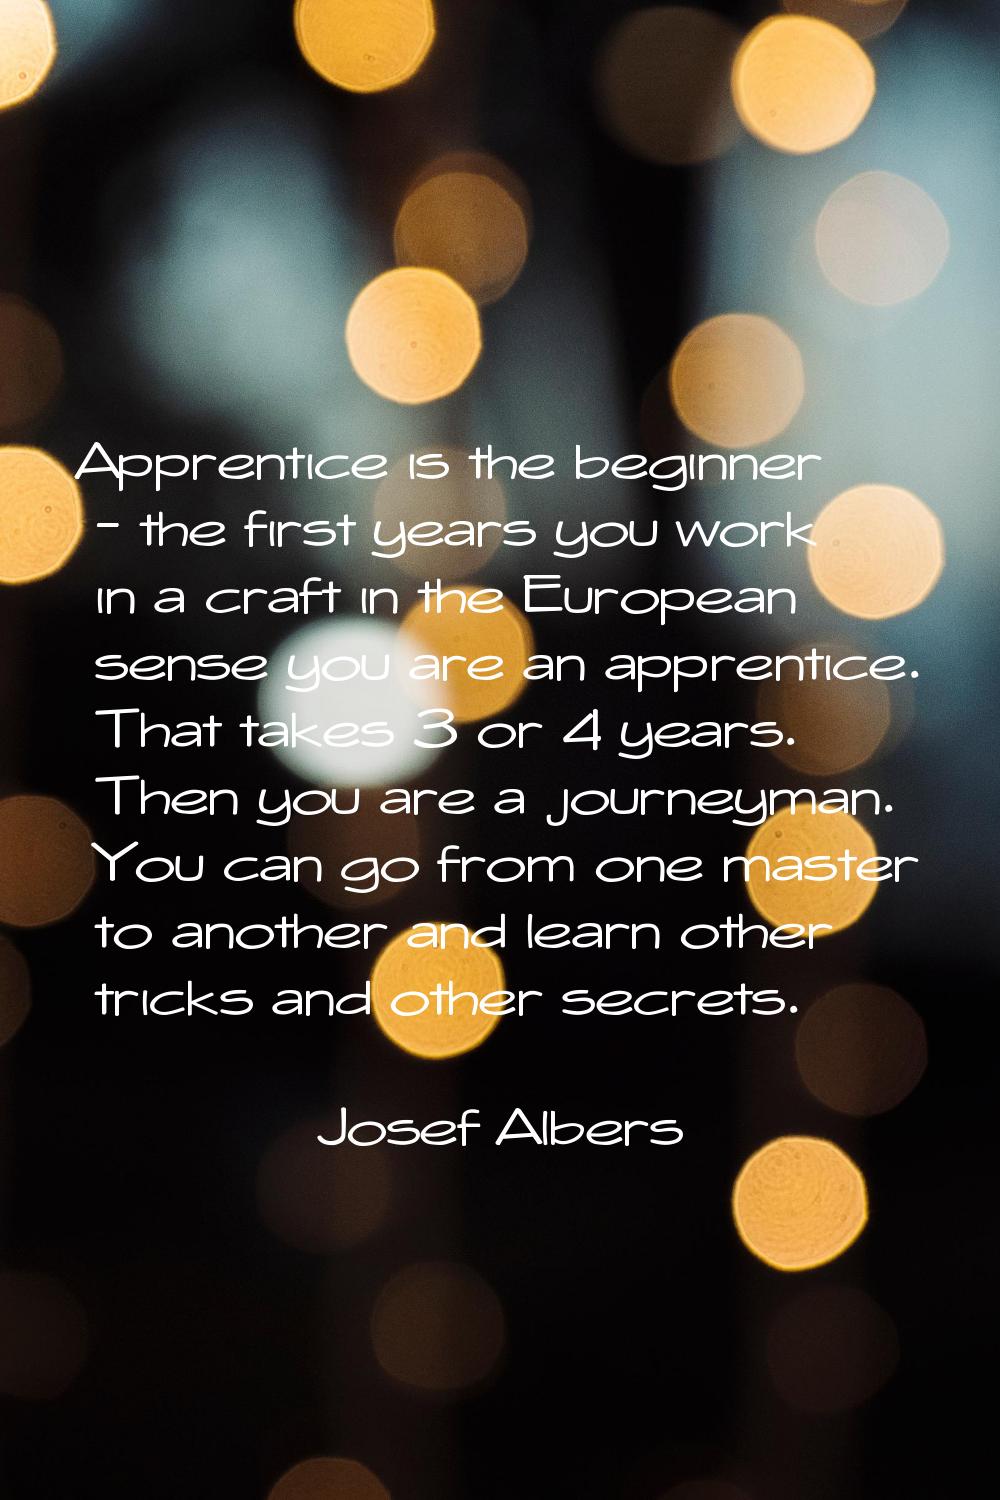 Apprentice is the beginner - the first years you work in a craft in the European sense you are an a